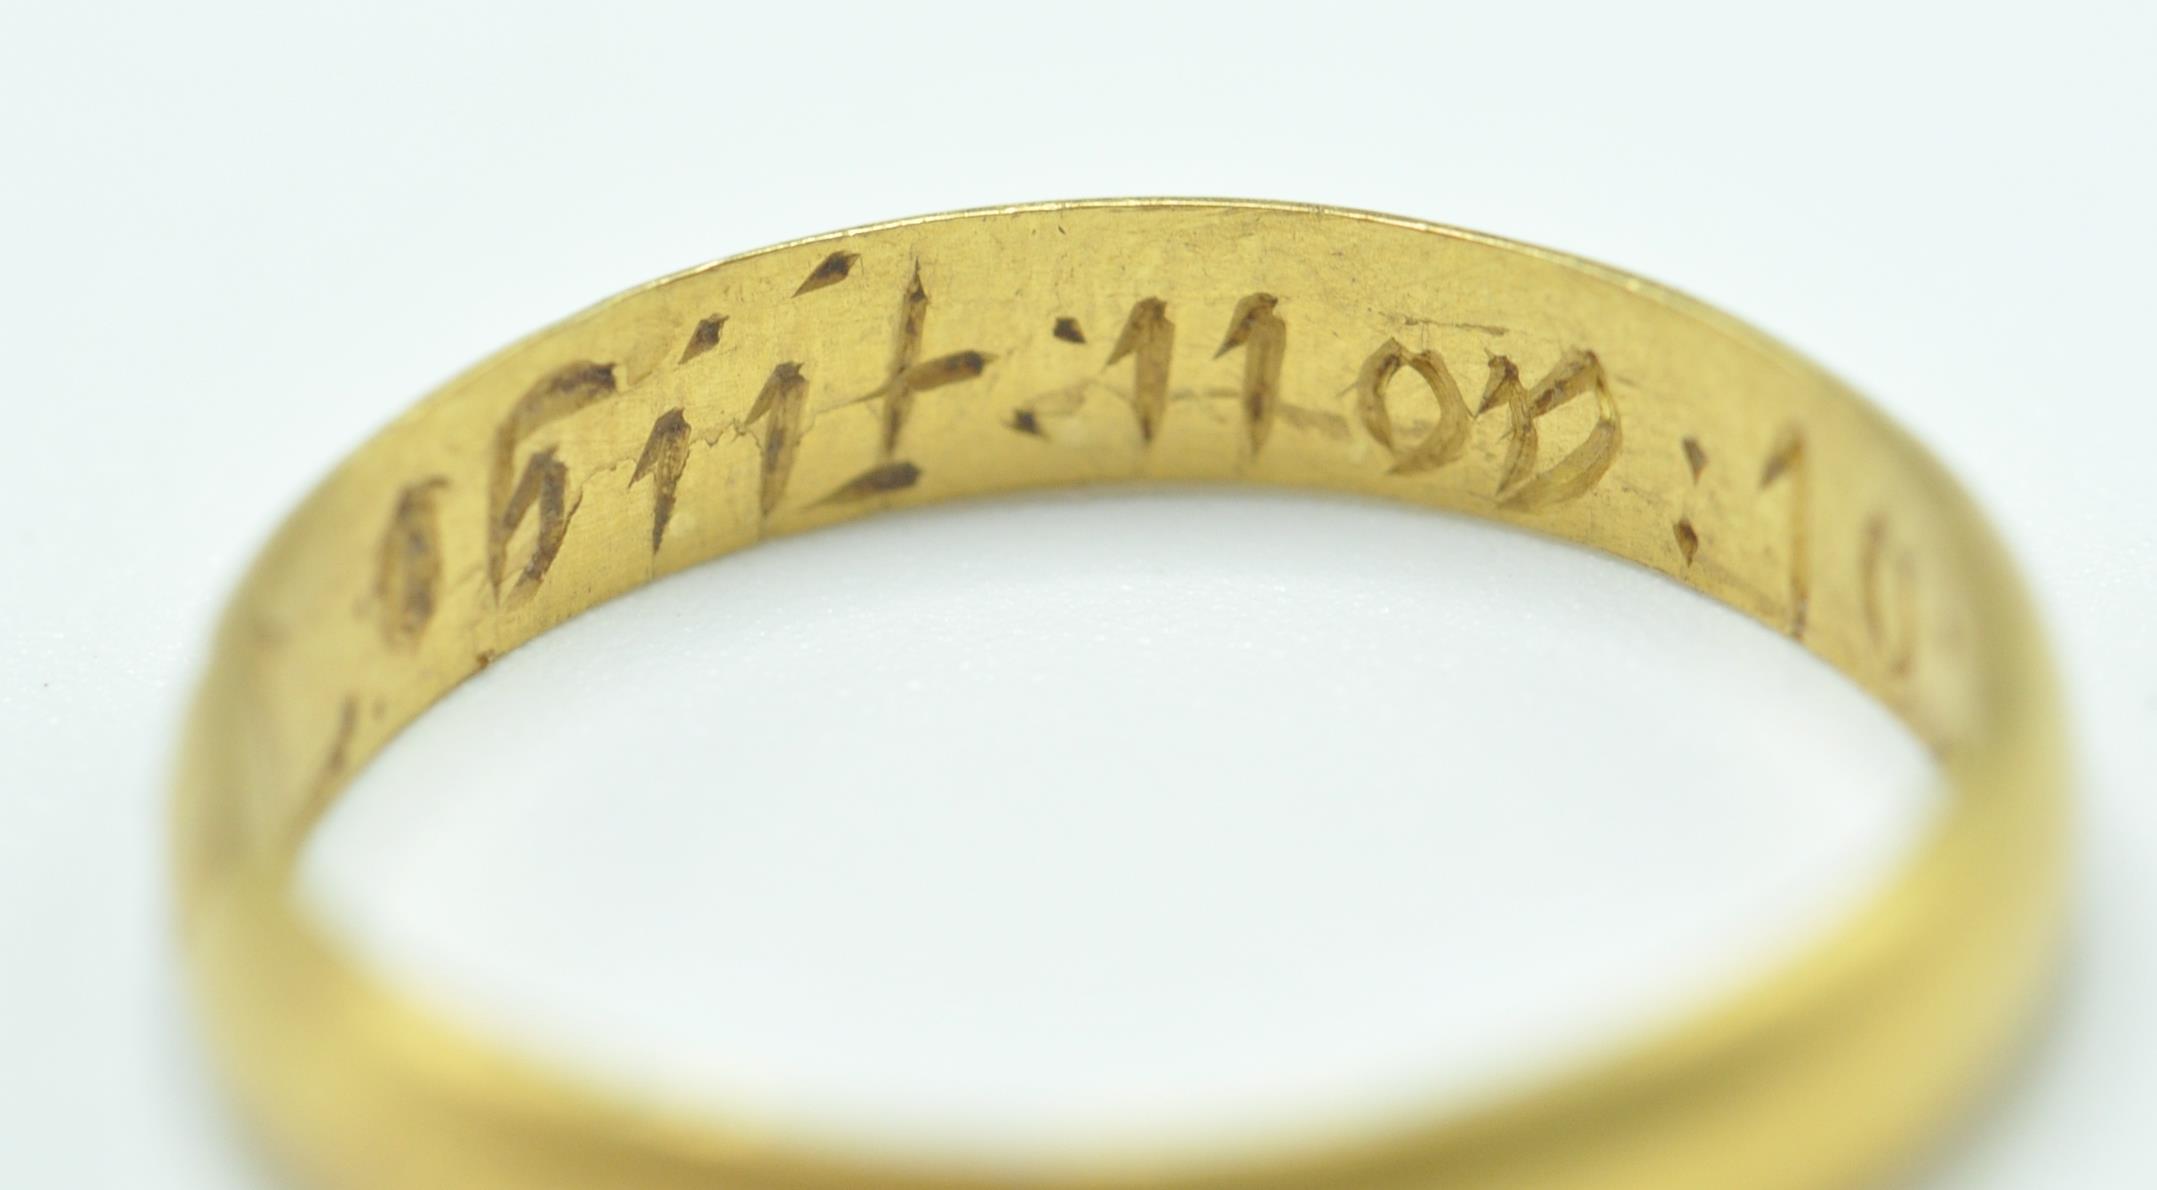 GEORGIAN GOLD MOMENTRO MORI MOURNING RING WITH SKULL - Image 7 of 9